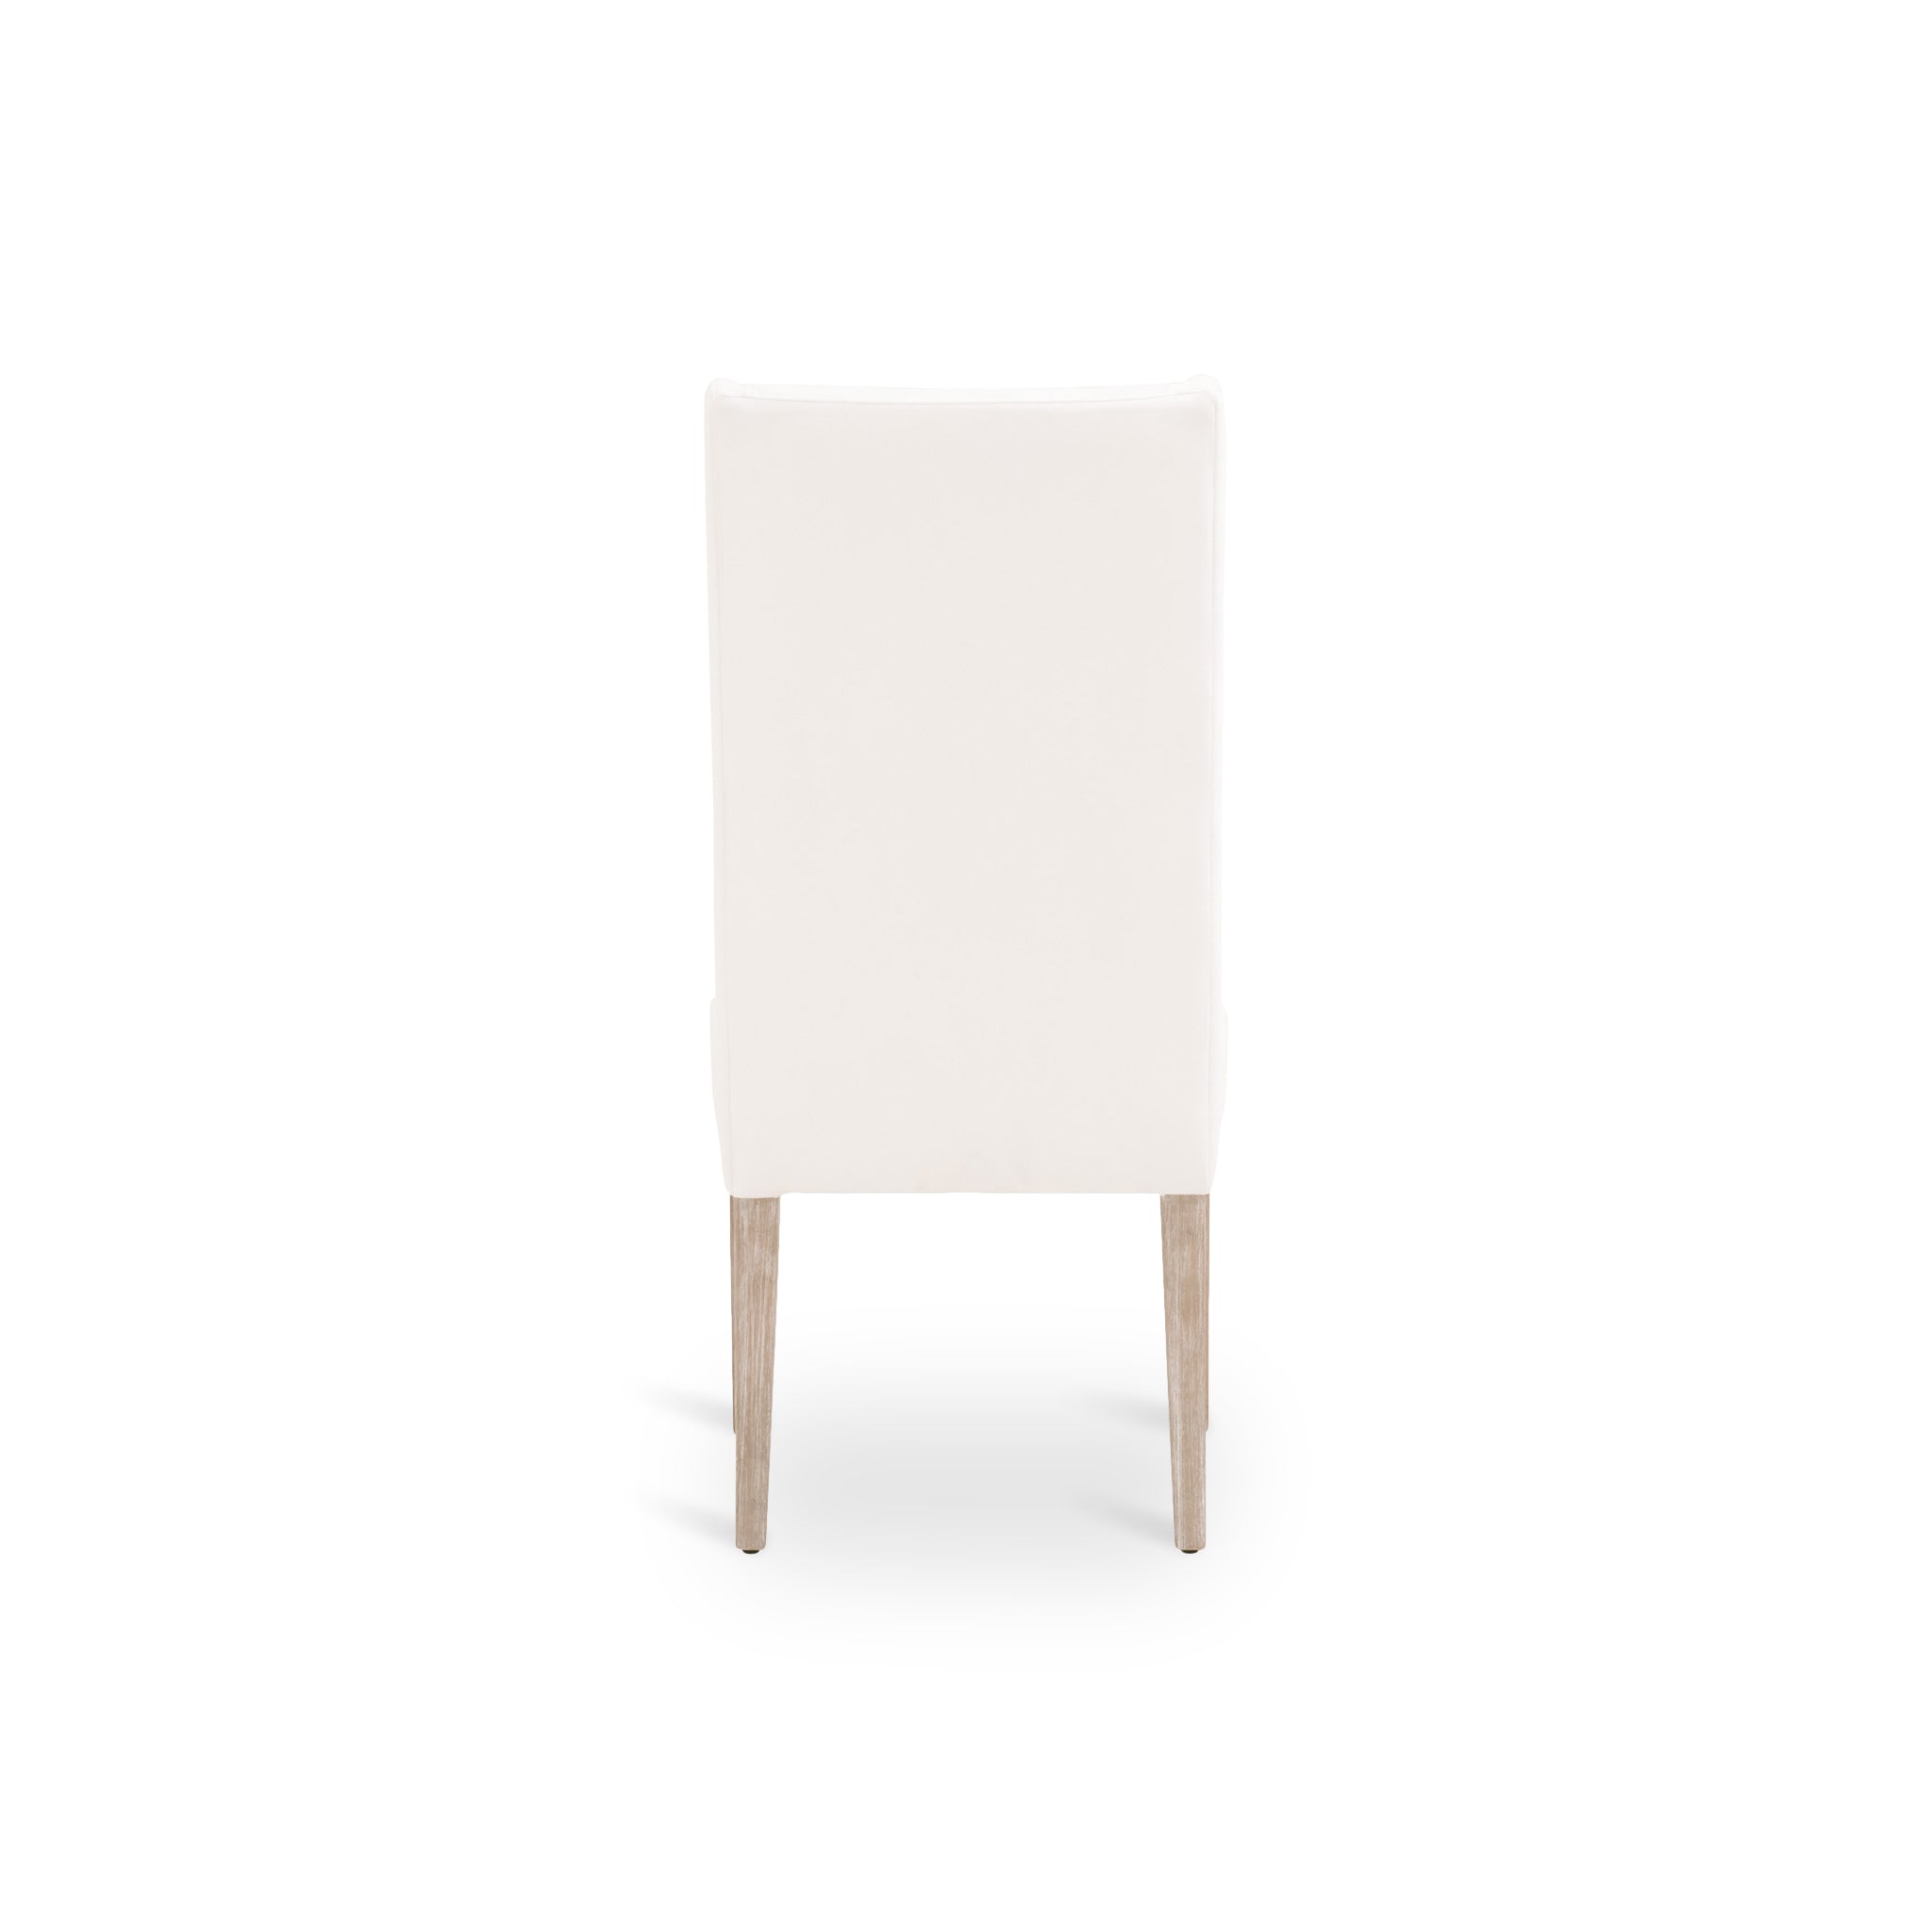 Fribourg Dining Chair - Set of 2